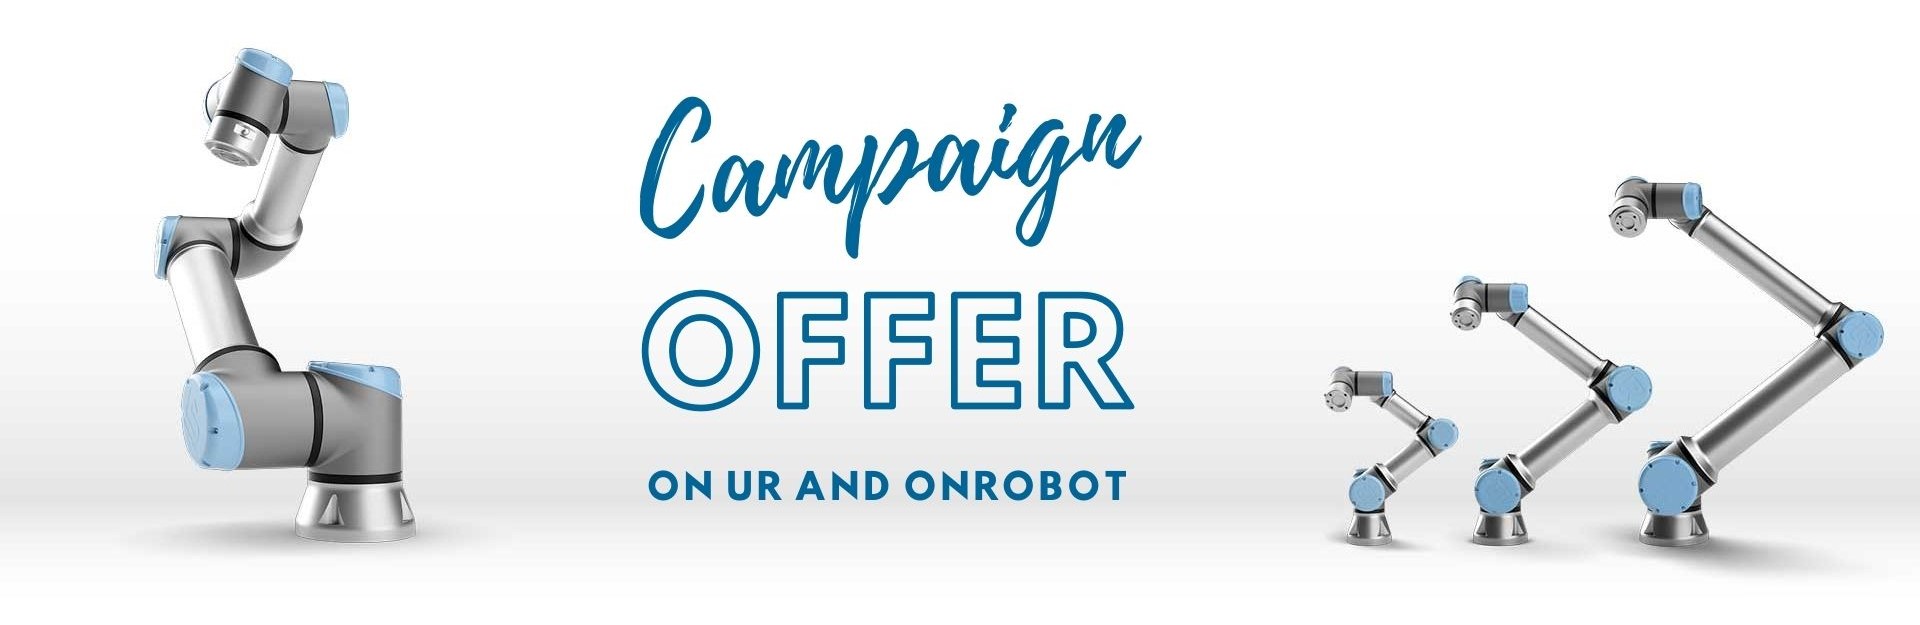 Campaign offer on UR and OnRobot